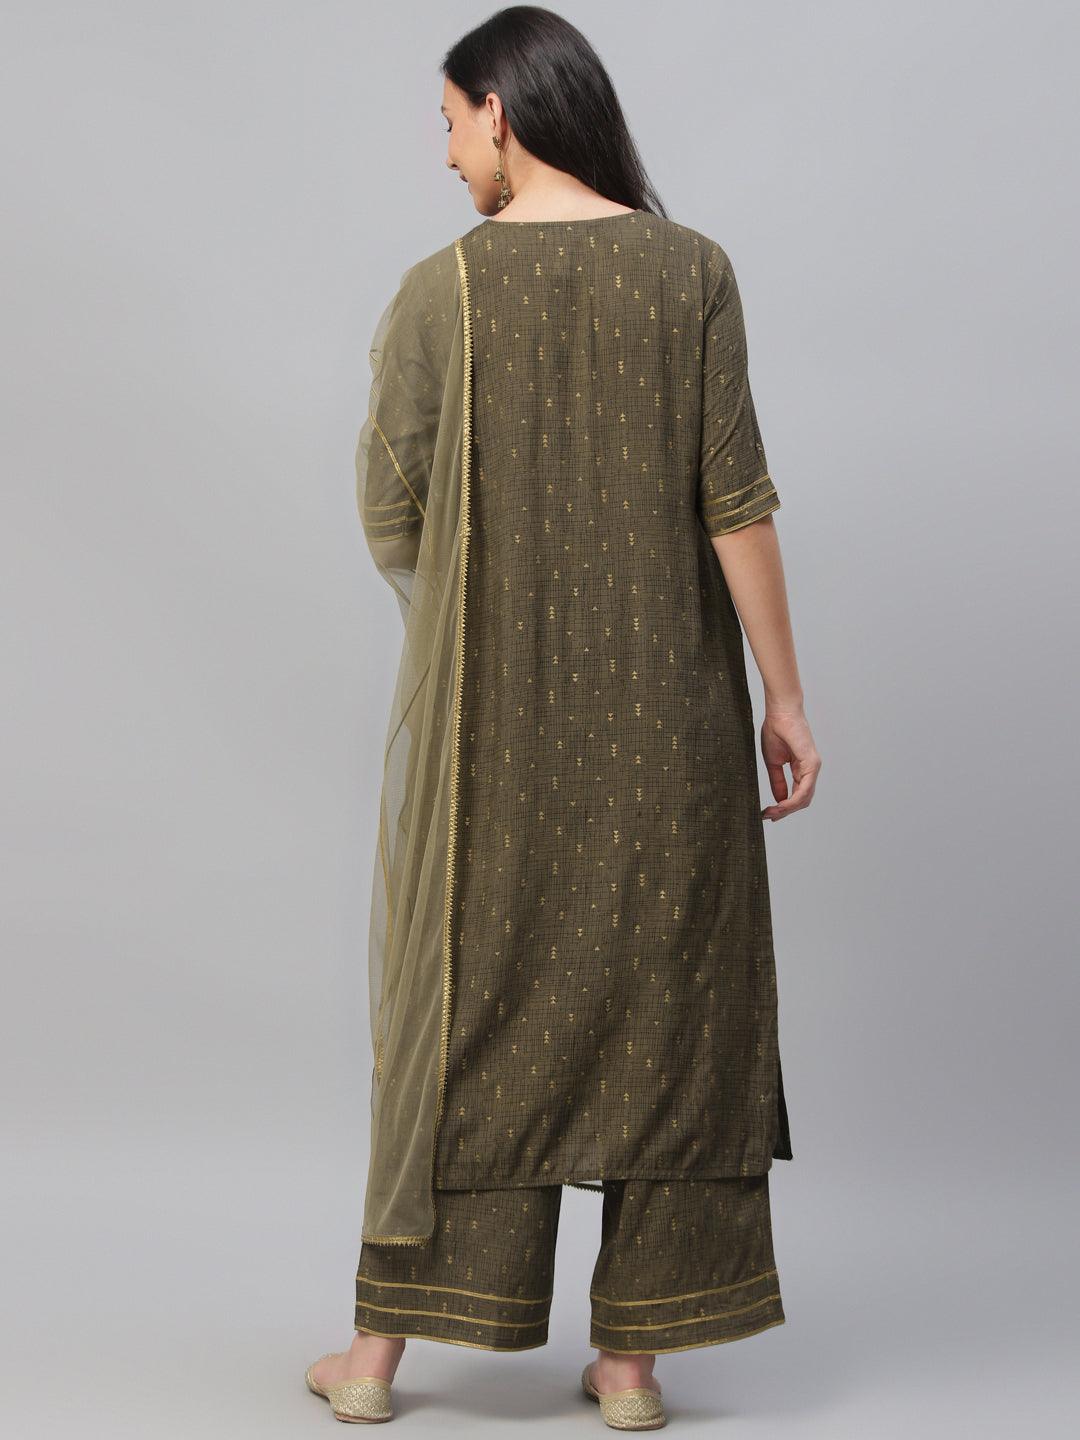 Olive Green Printed Rayon Suit Set - Libas